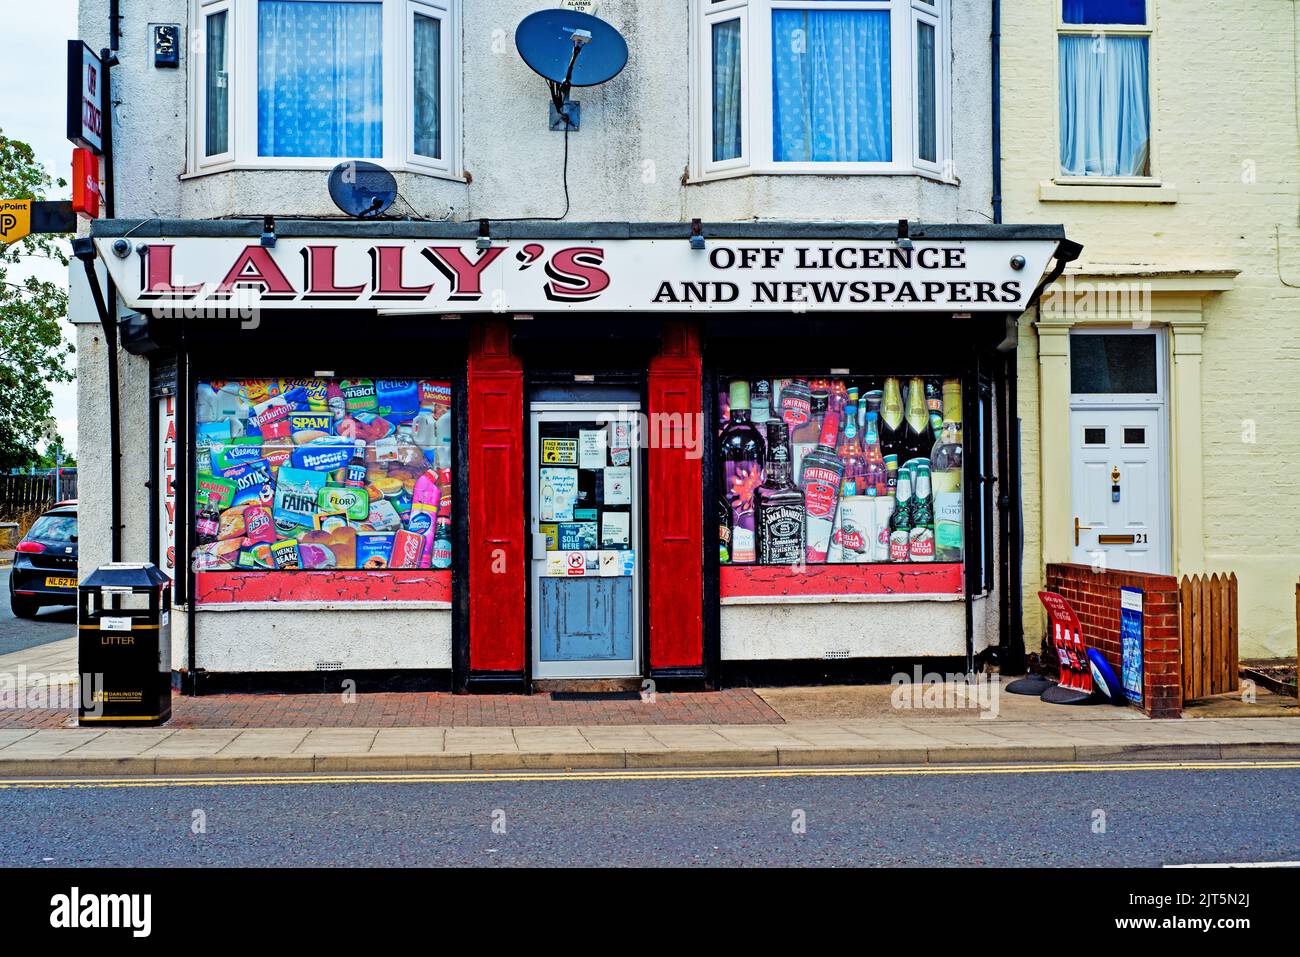 Lallys Off License and Newspapers, St Johns Terrace, Darlington, England Stock Photo